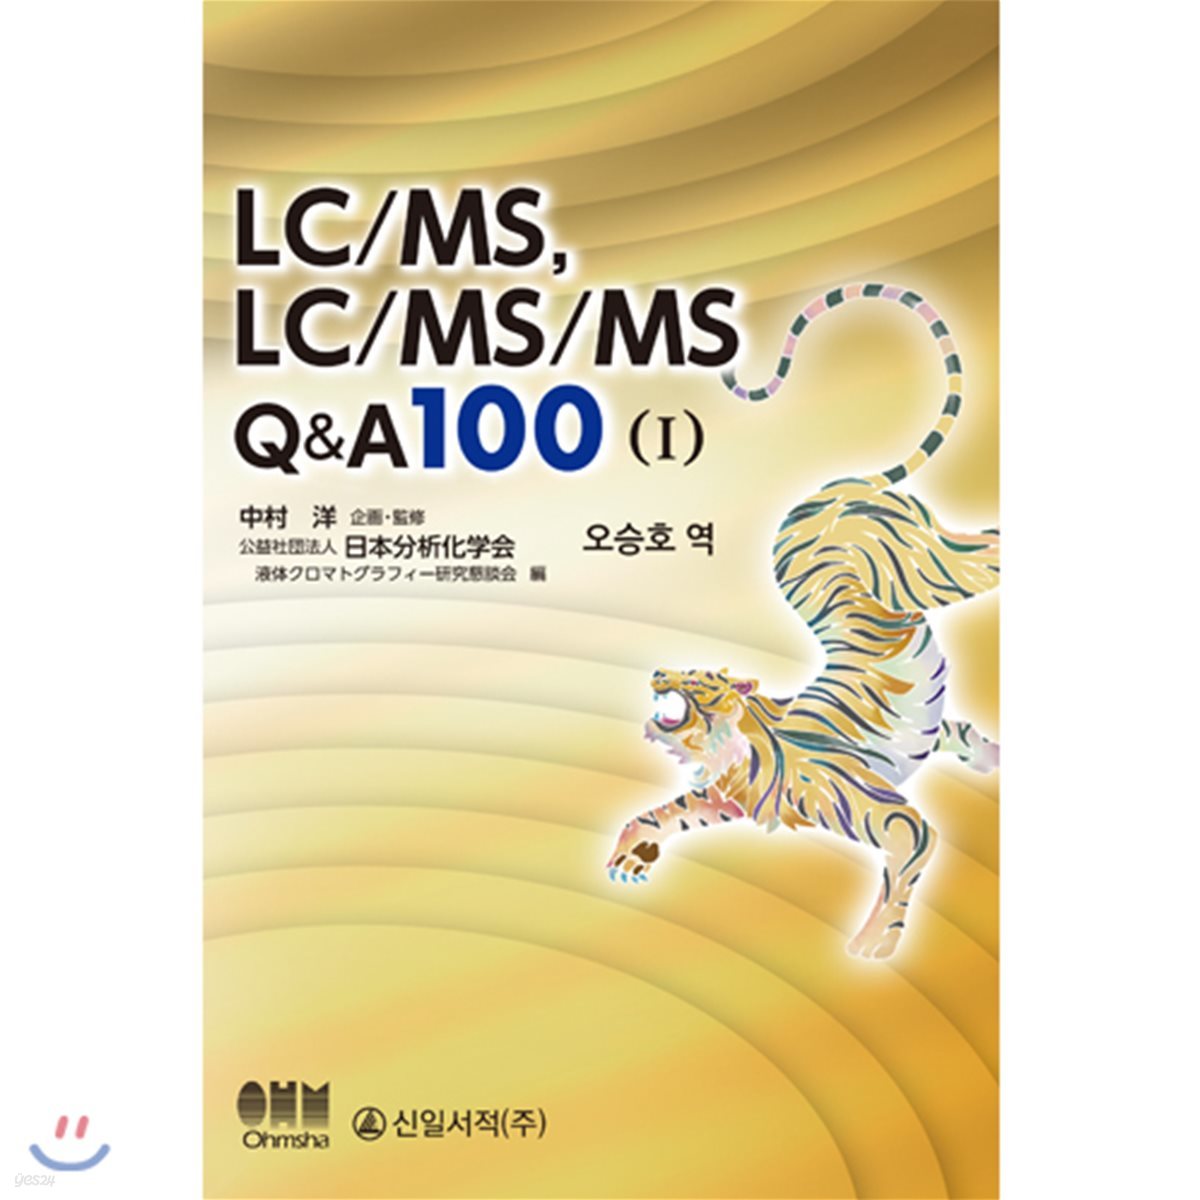 LC/MS, LC/MS/MS Q&amp;A 100 1